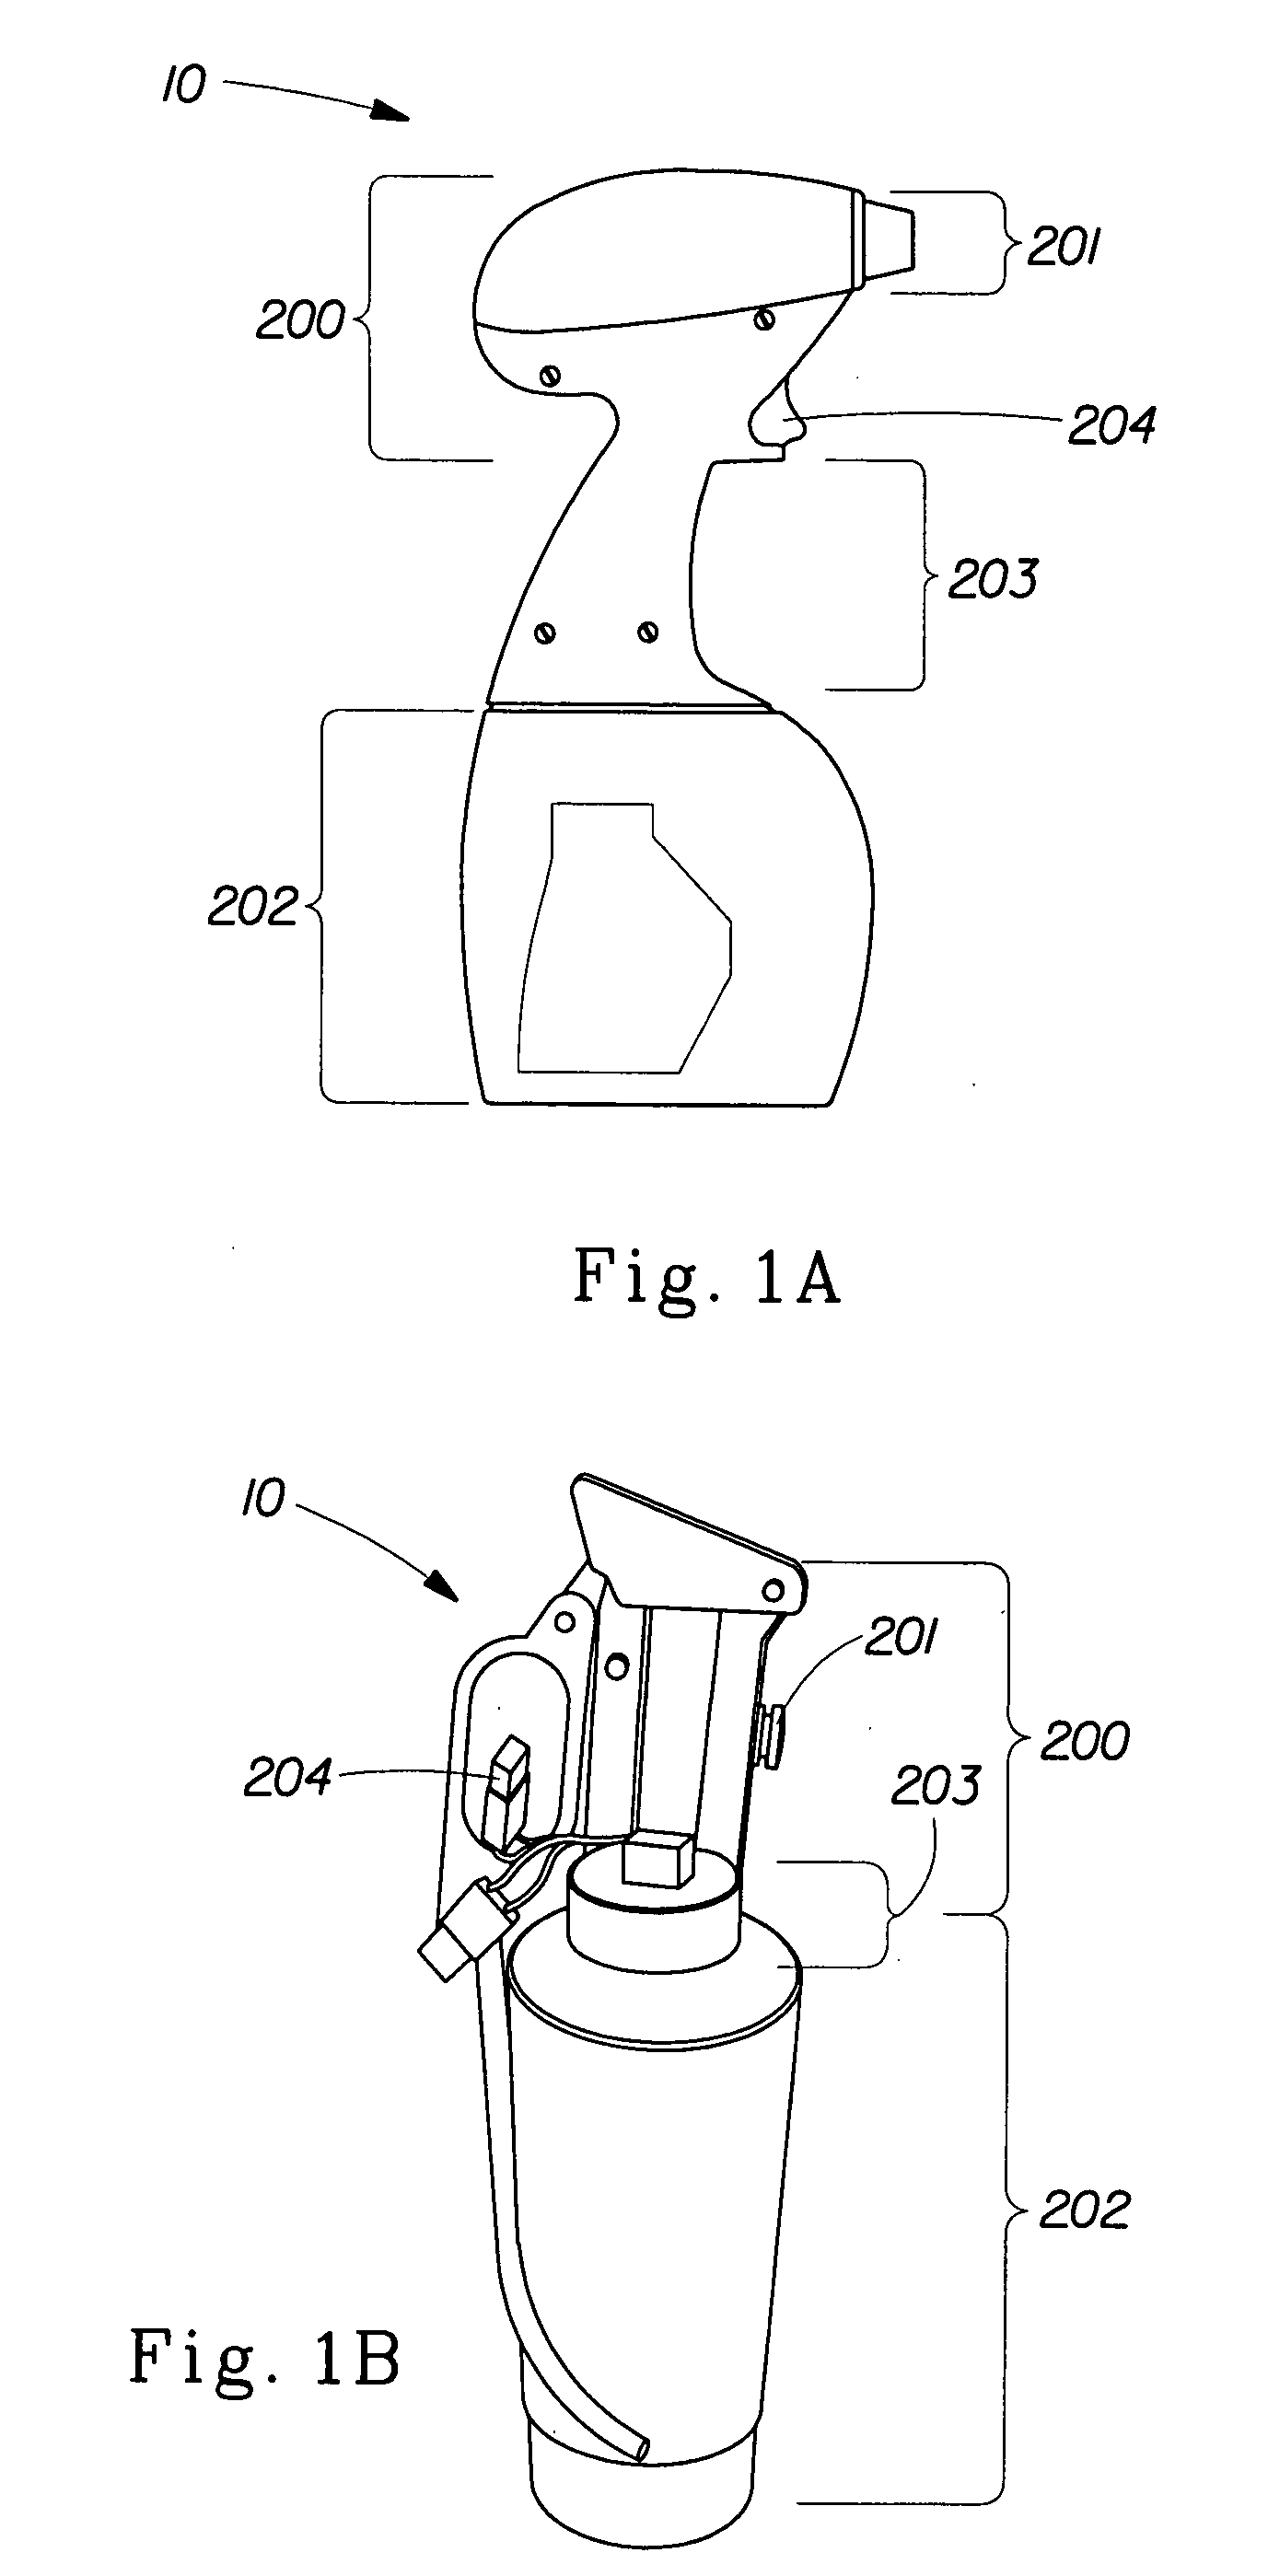 Portable bio-chemical decontaminant system and method of using the same